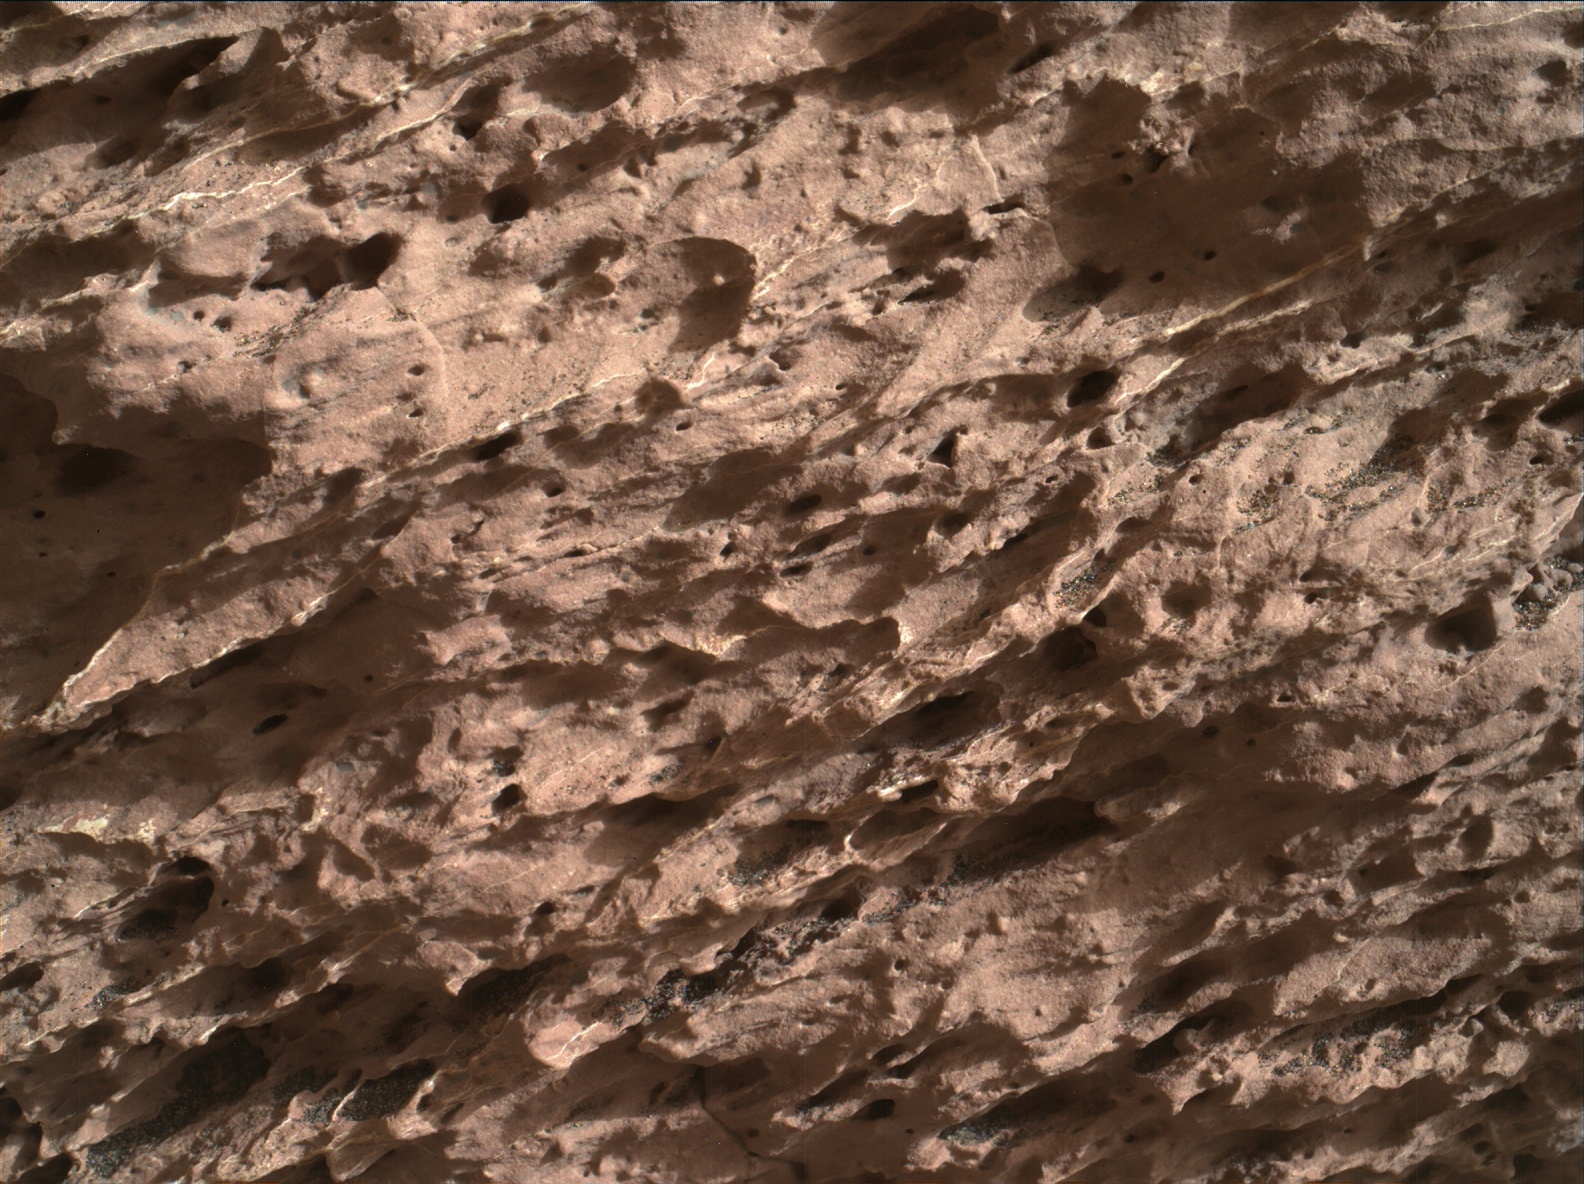 Nasa's Mars rover Curiosity acquired this image using its Mars Hand Lens Imager (MAHLI) on Sol 1582